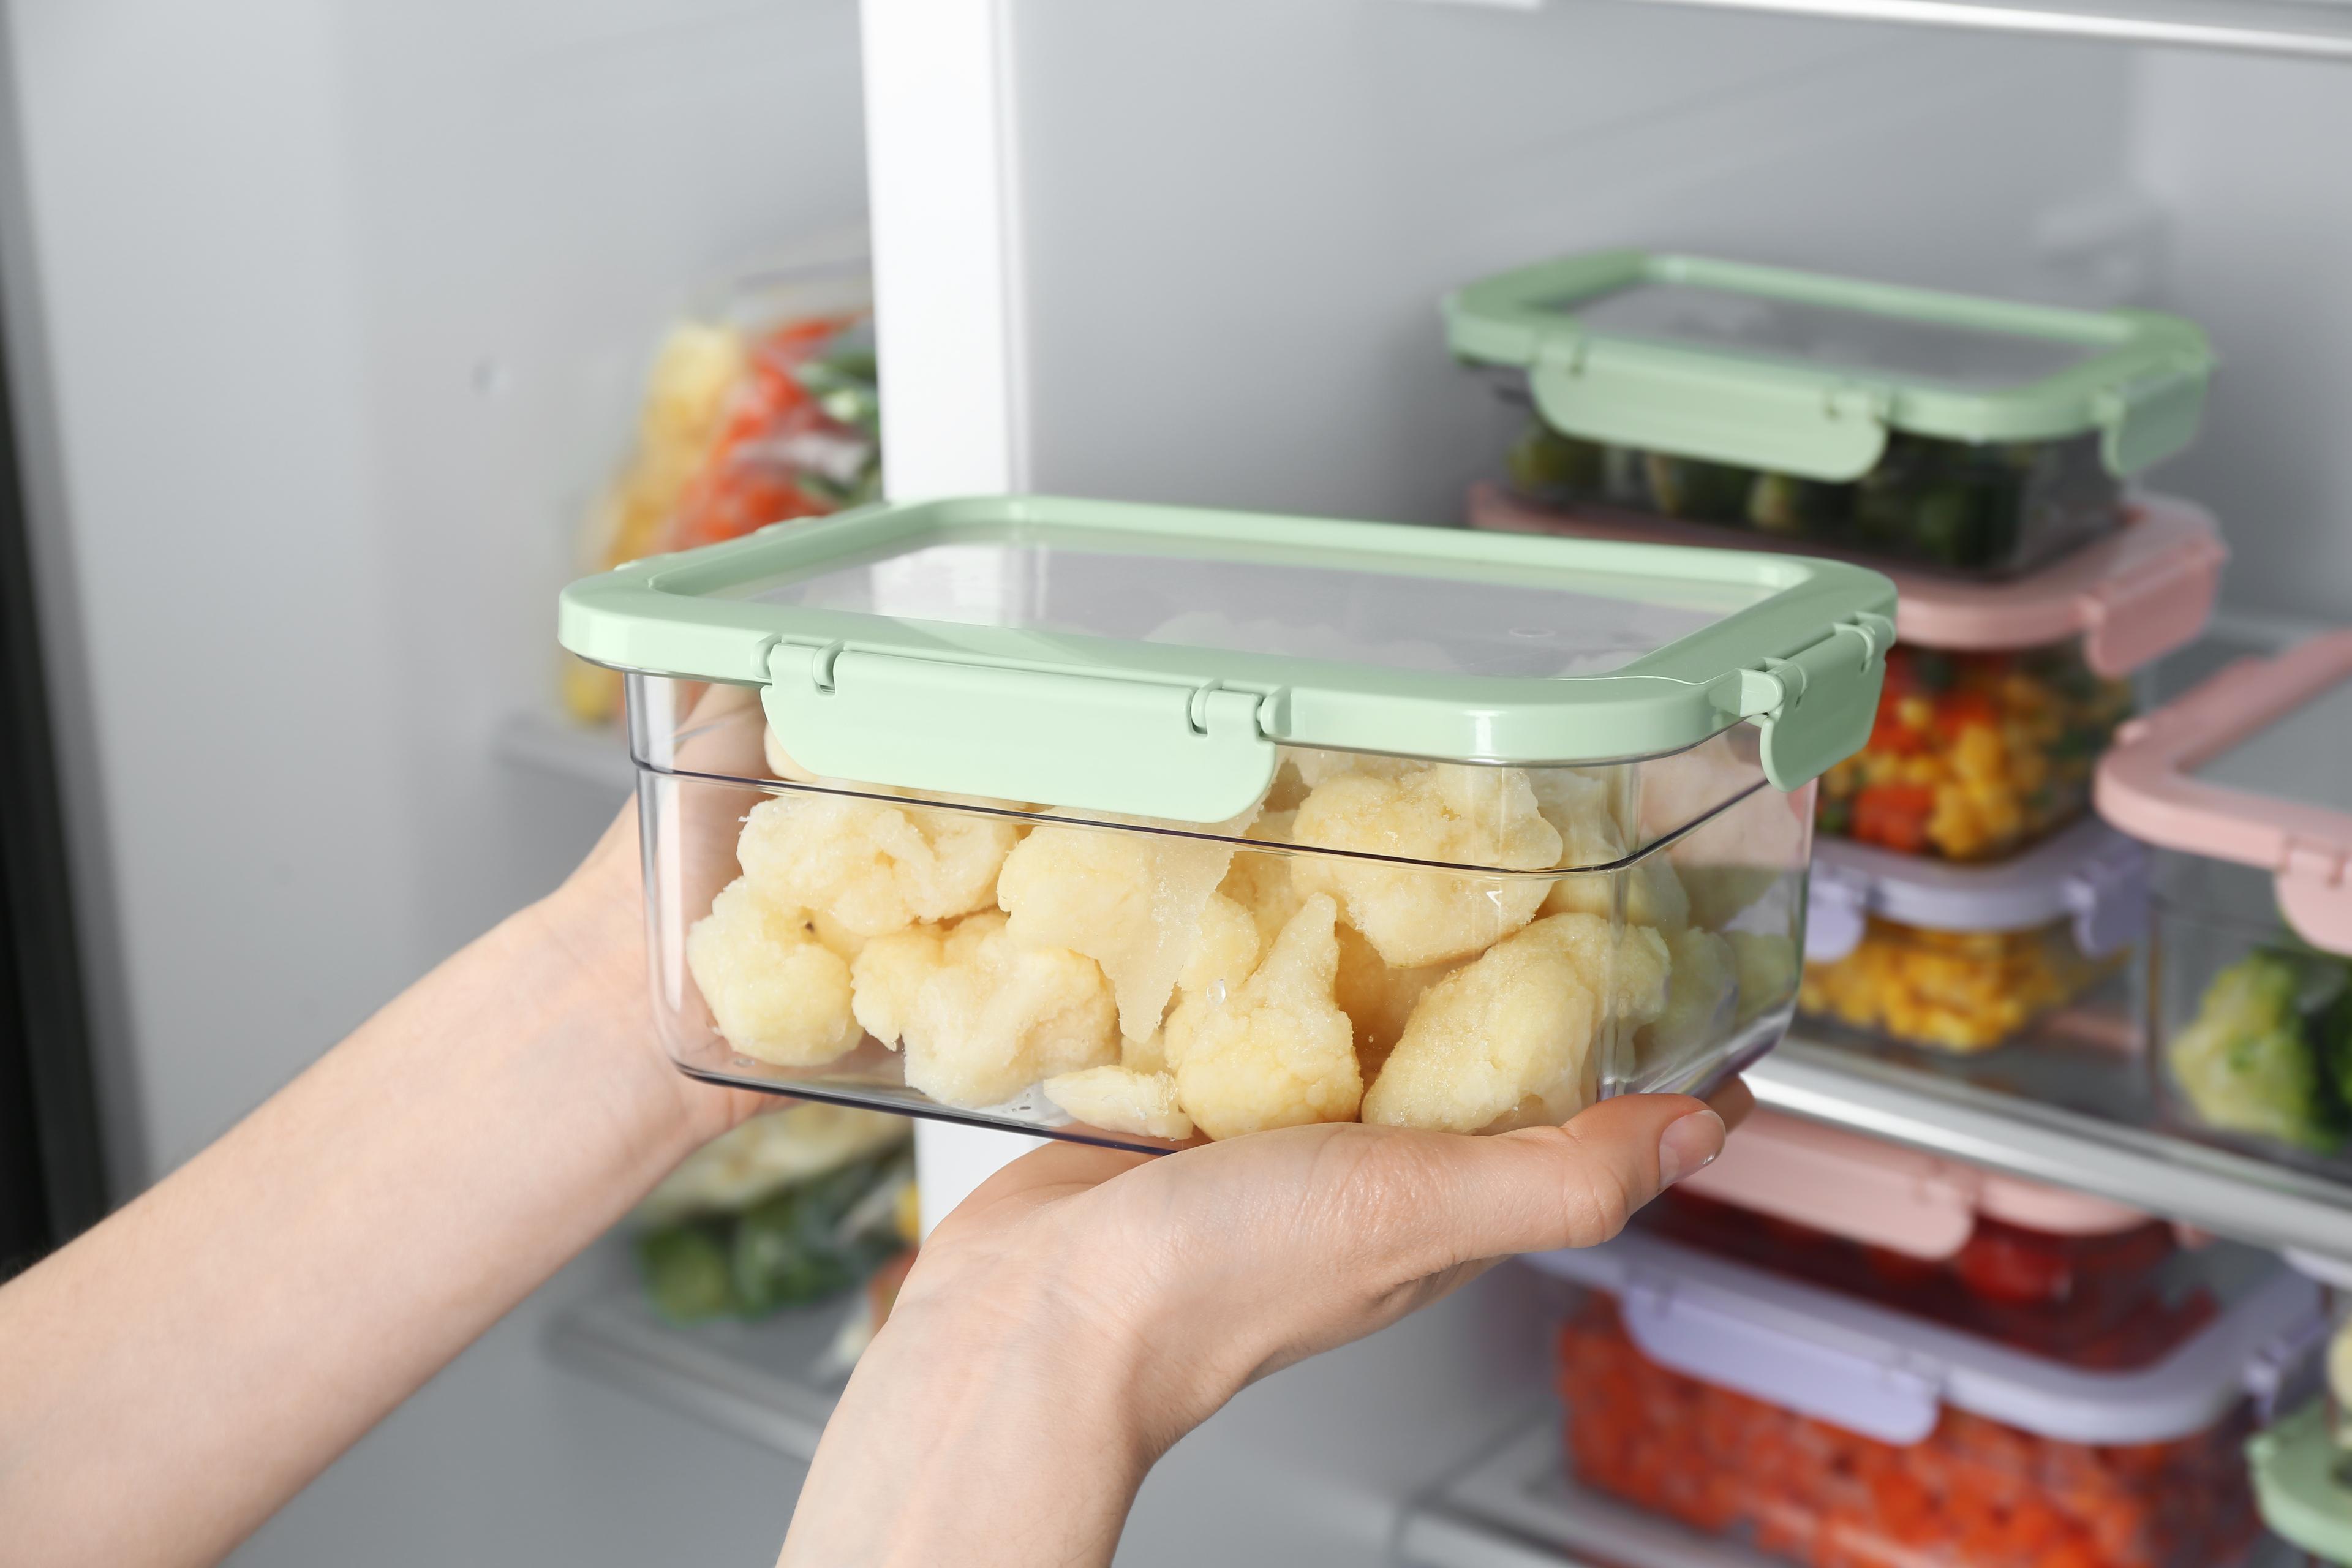 A woman takes a container out of the fridge.